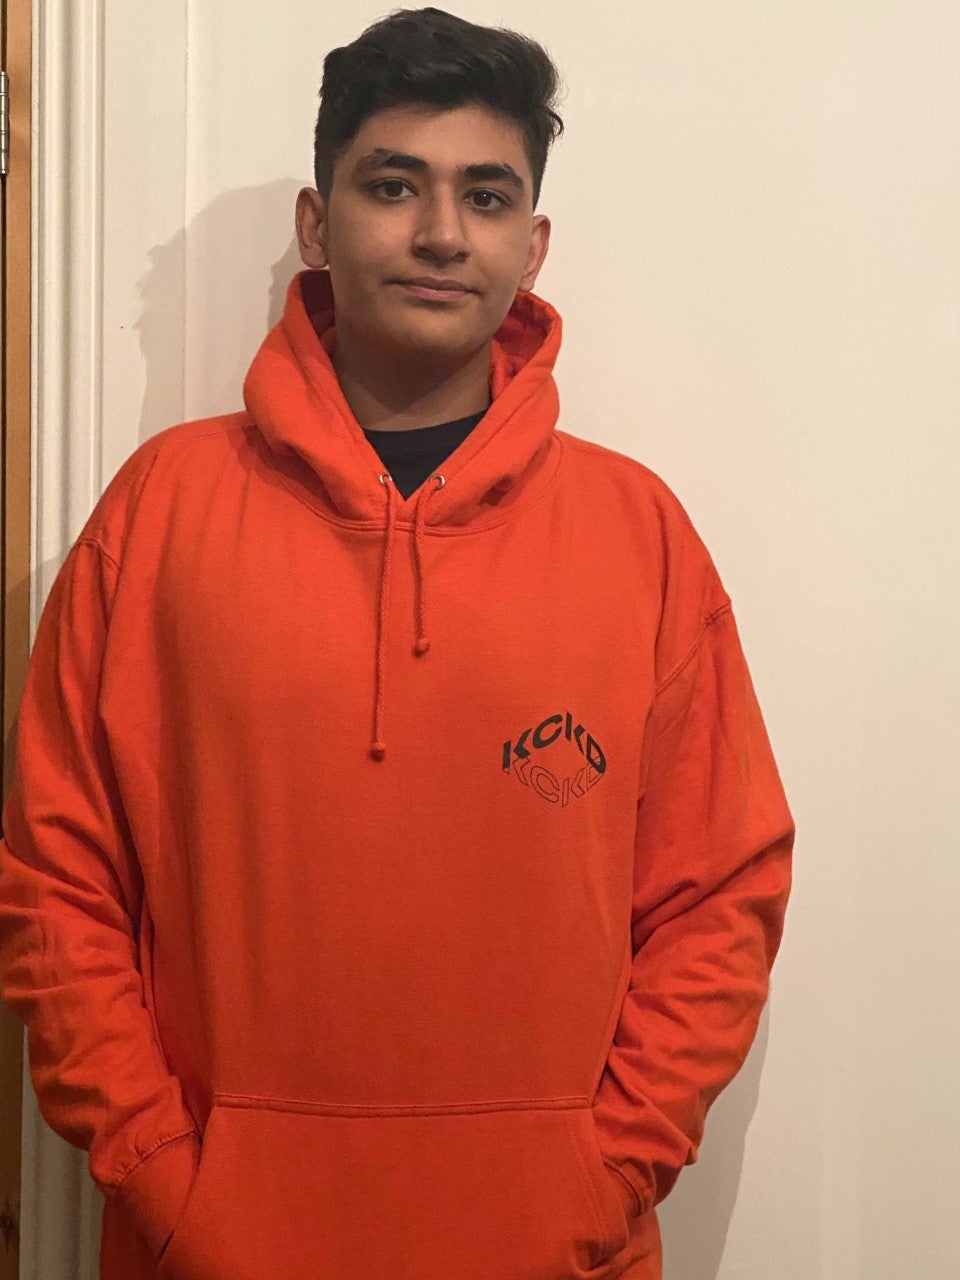 Qais Hussain in his KCKD jumper, May 2020